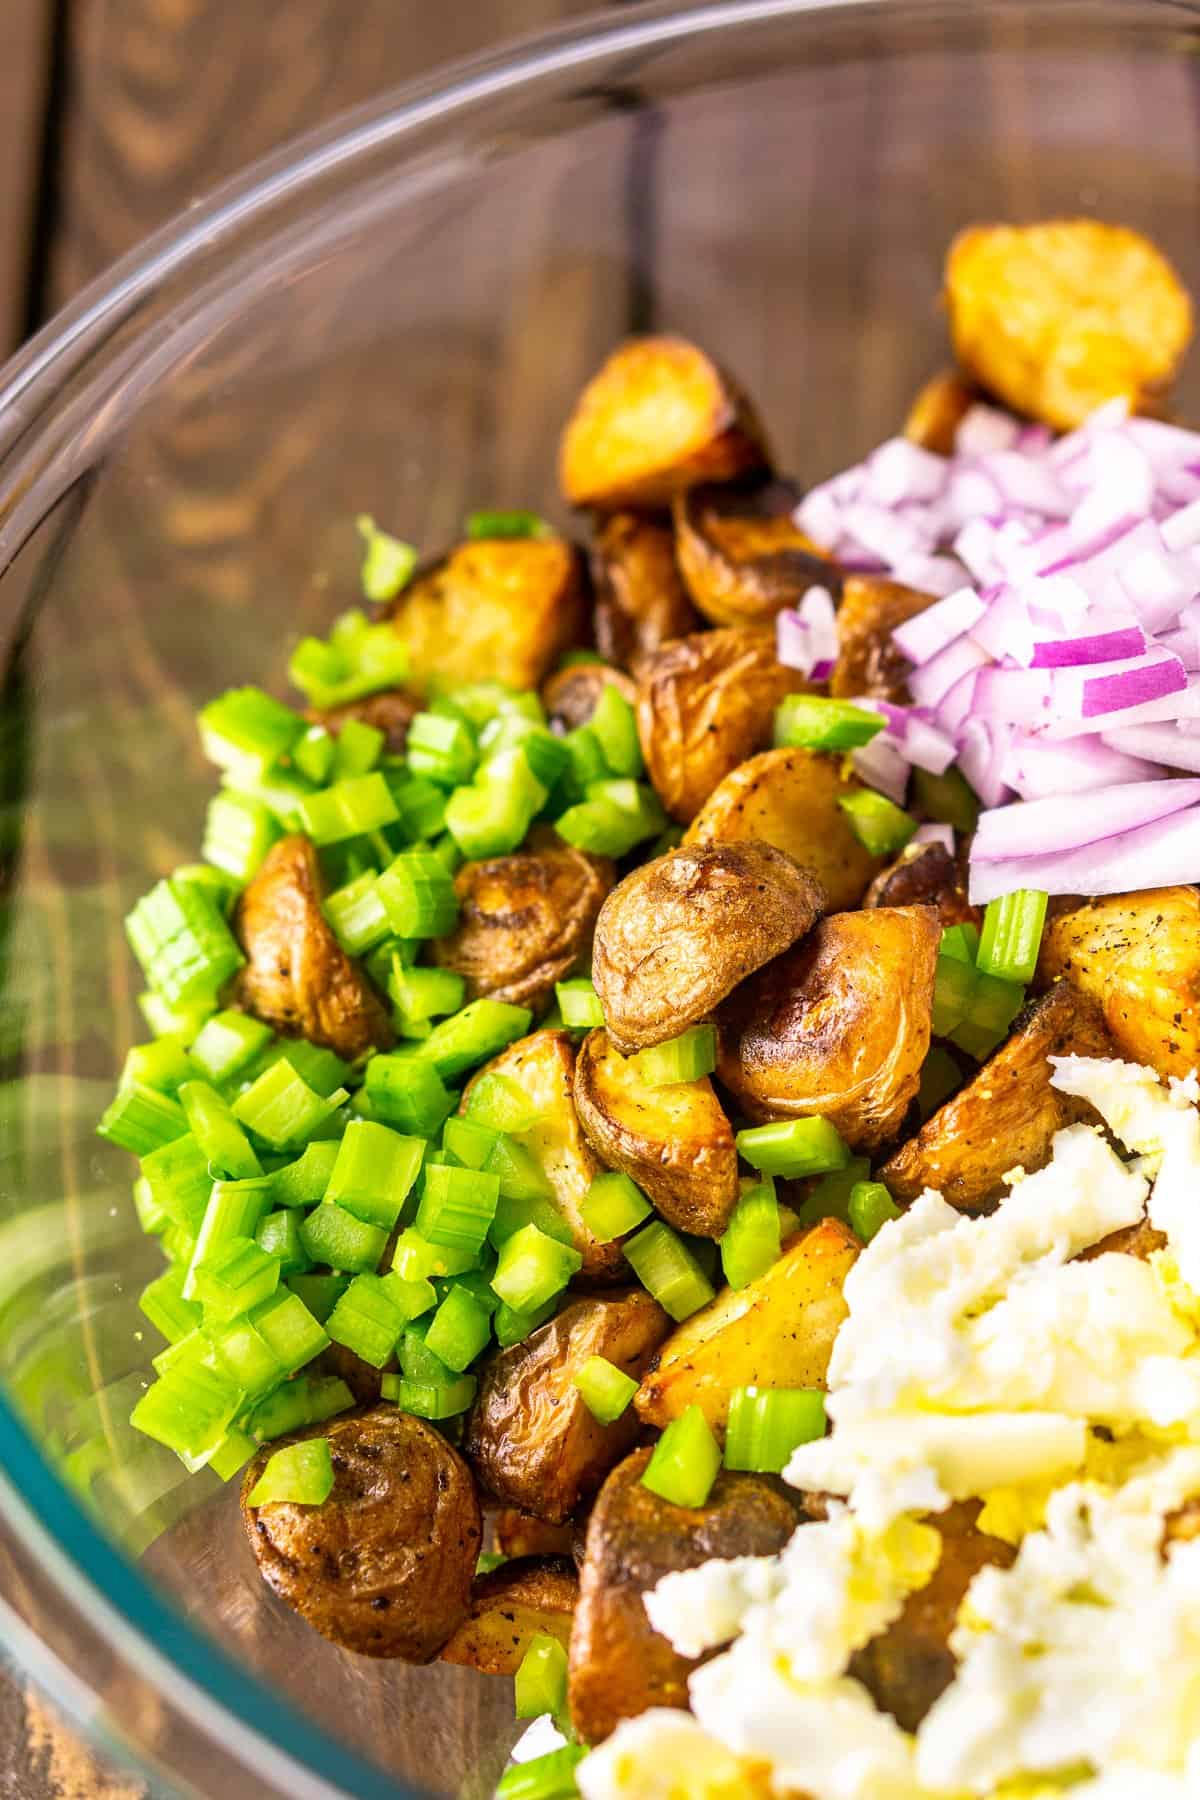 A bowl of roasted potatoes, celery, red onions and chopped eggs.